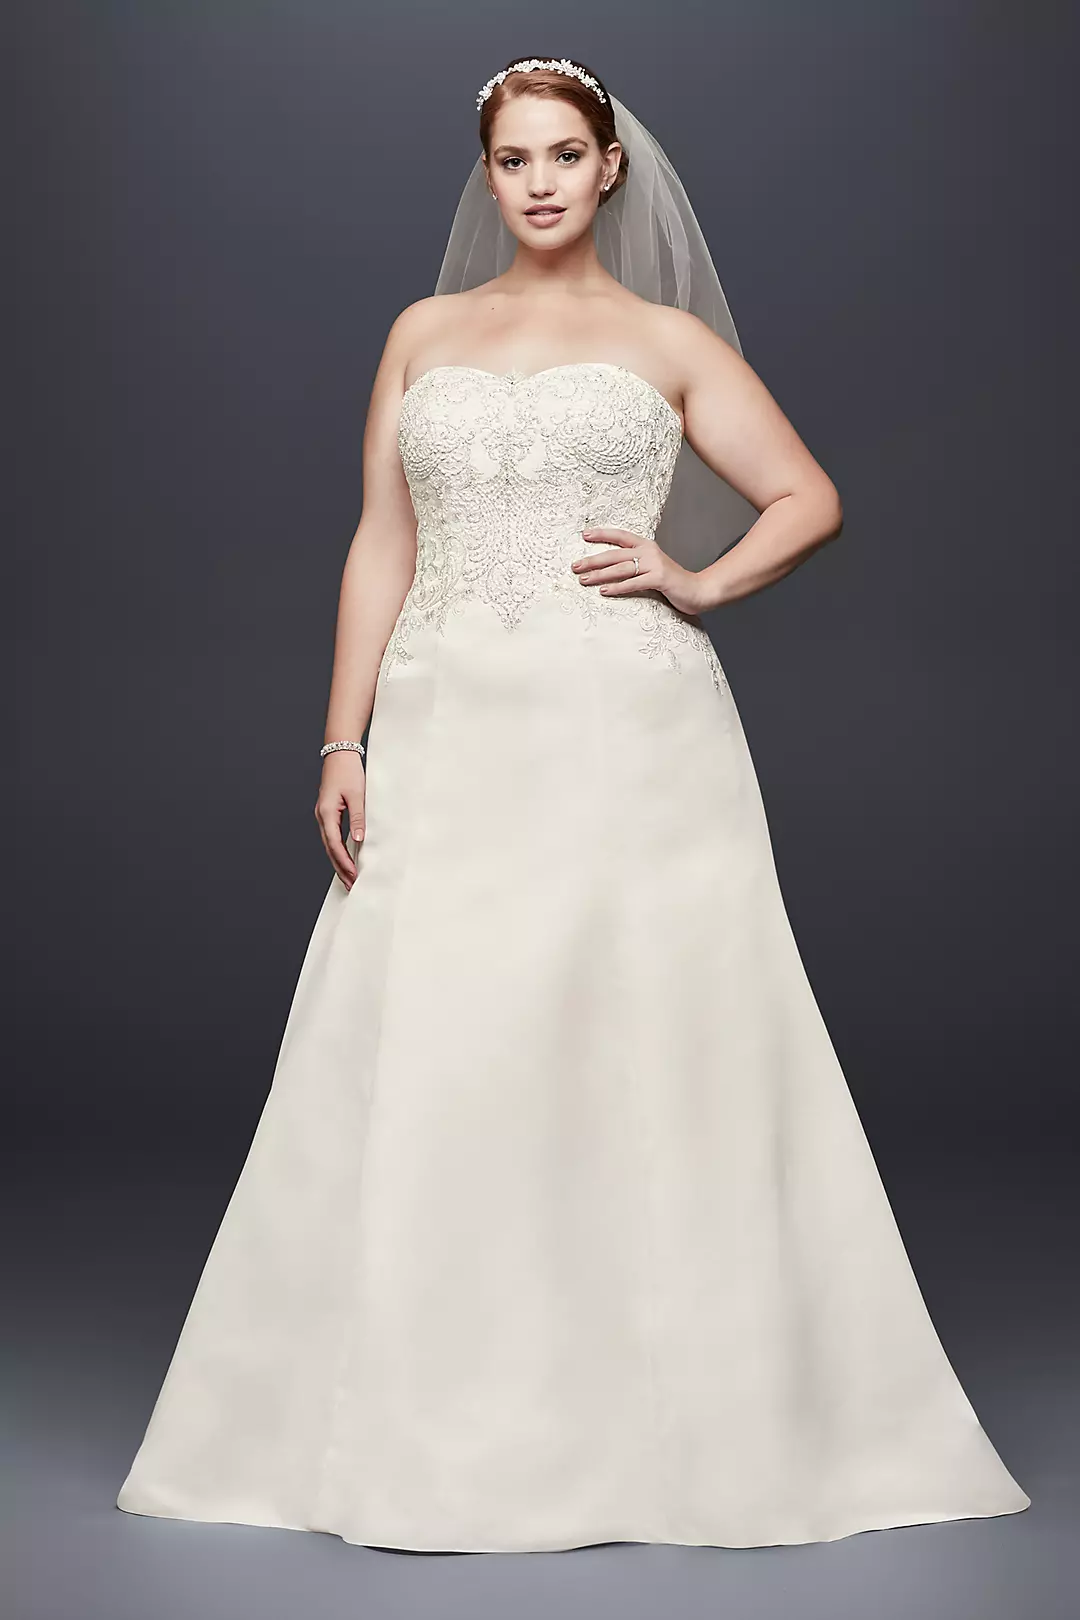 Strapless Satin A-line Wedding Dress with Beading Image